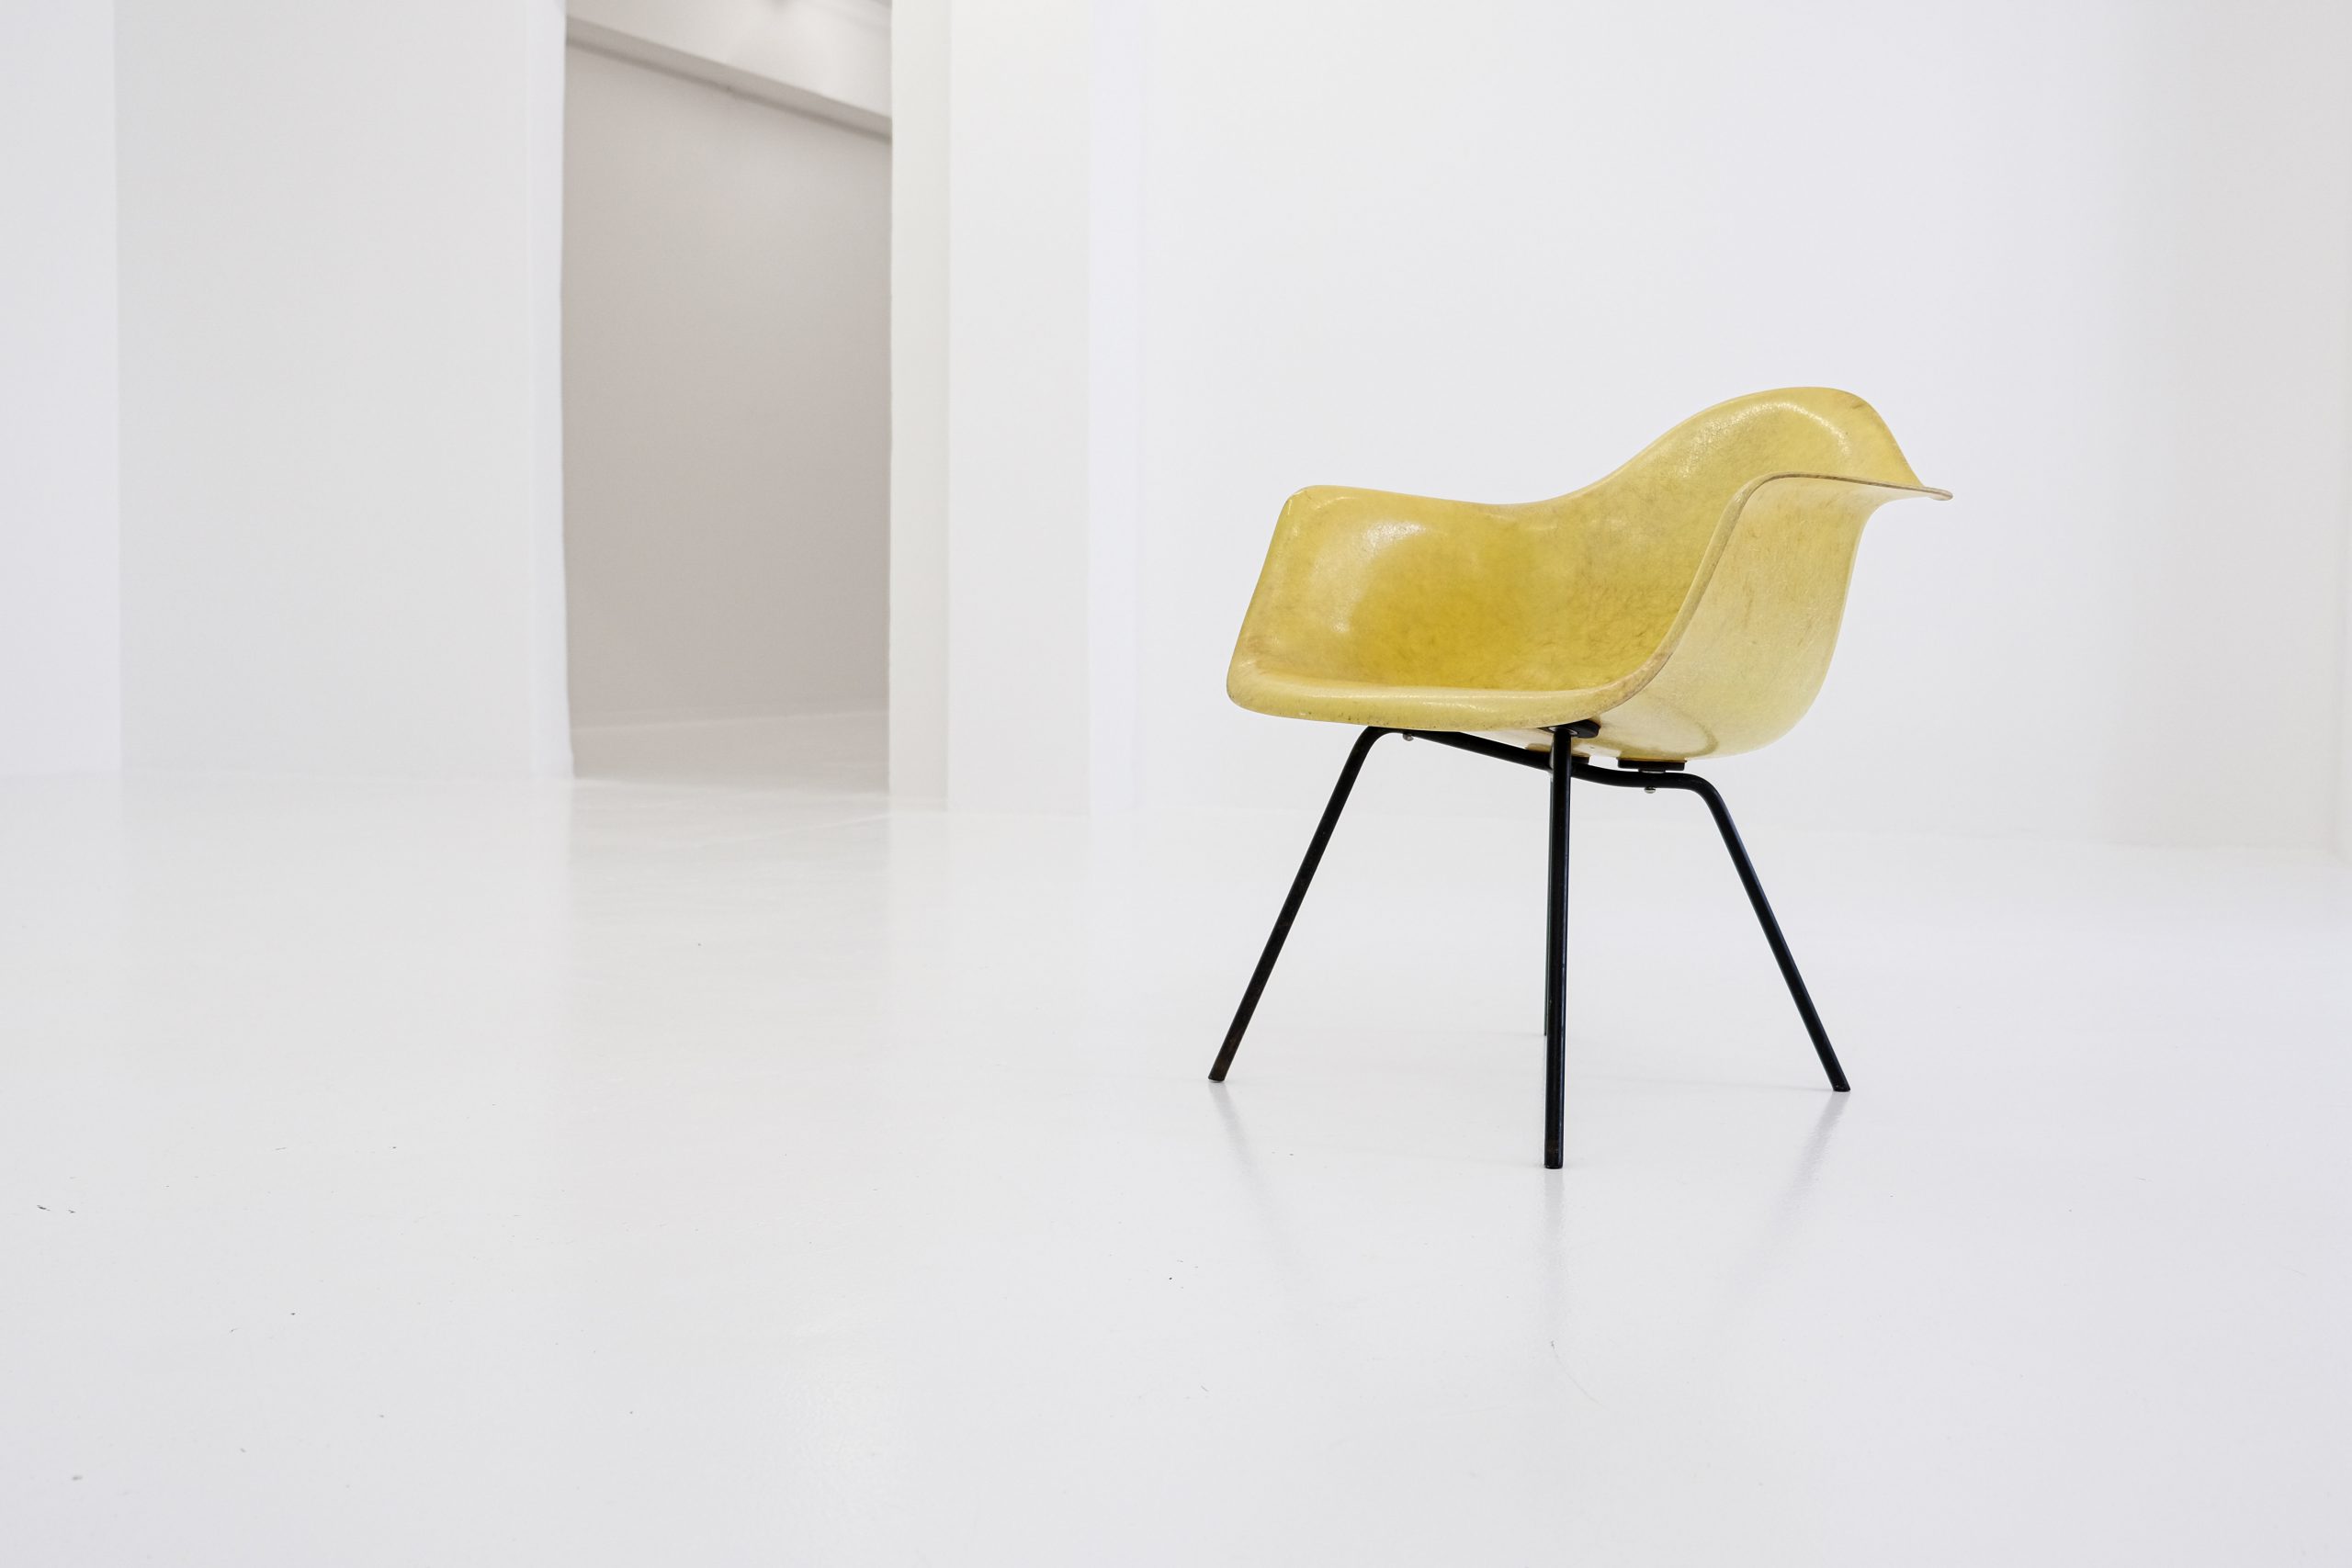 dax, dining height armchair x-base, eames, ray eames, charles eames, zenith production, lemon ylellow, rope edge, 1st generation, fiberglas, eames chair, x-base